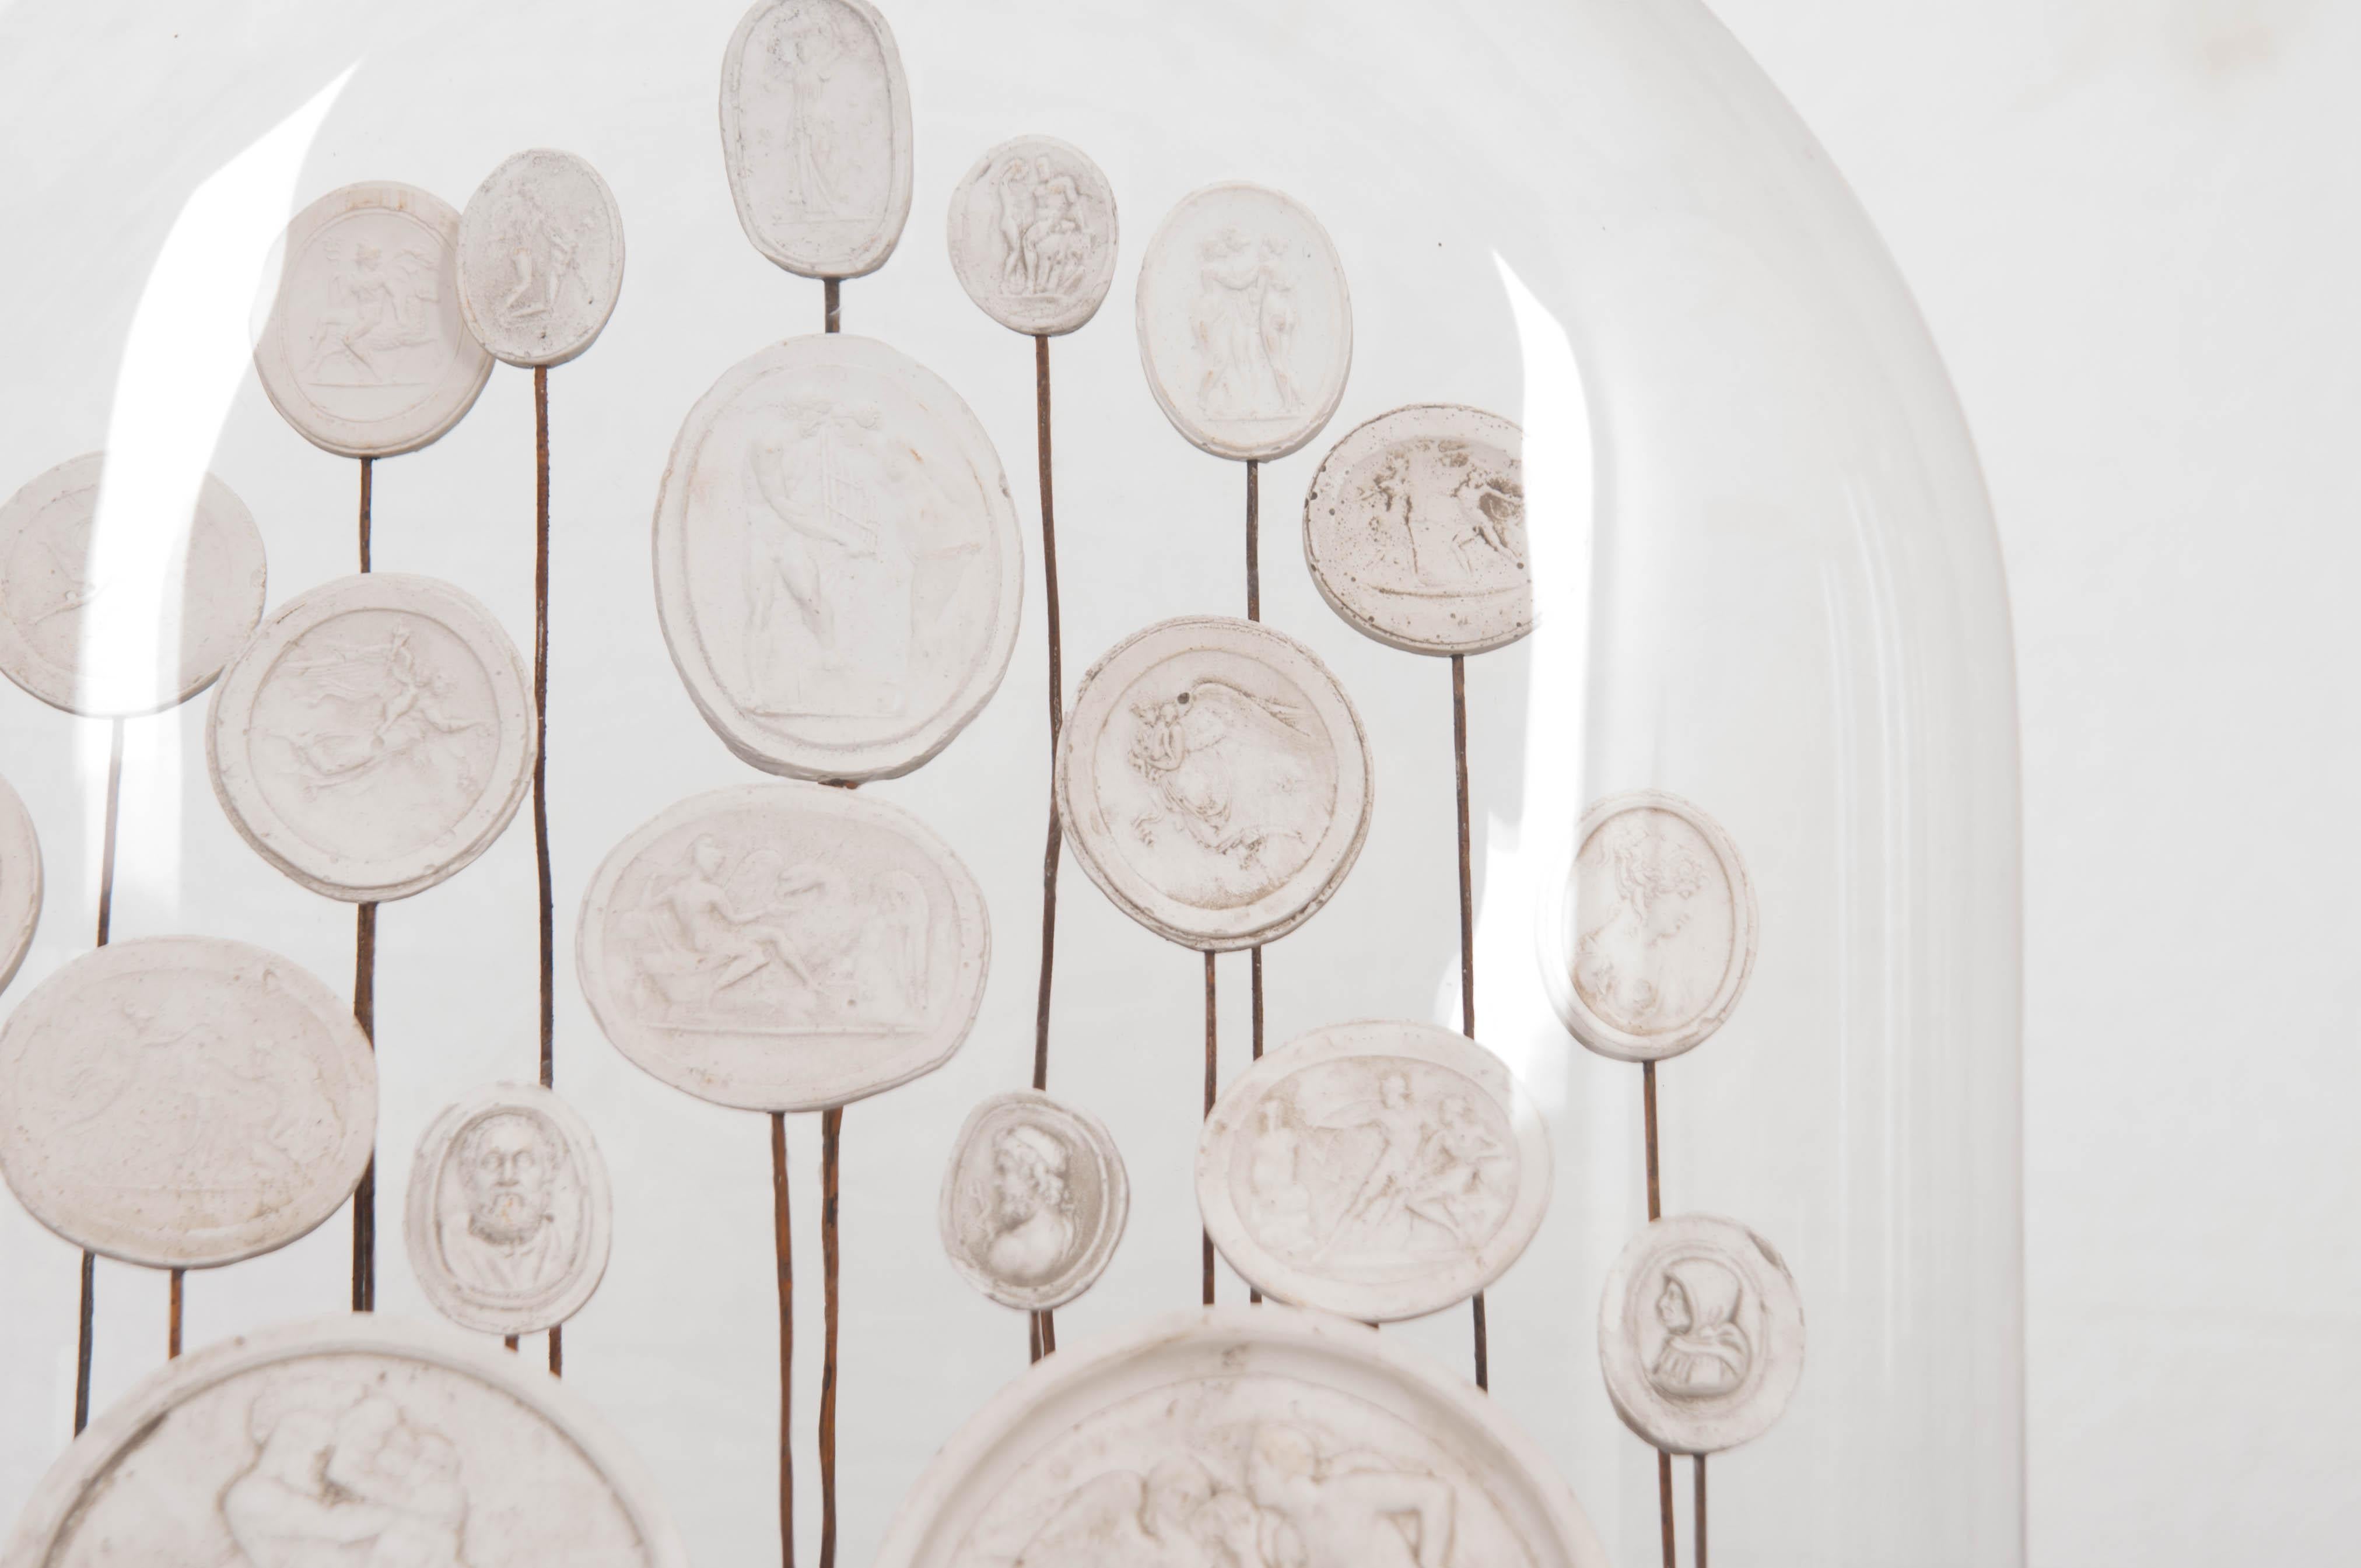 A beautiful assortment of recently-made plaster intaglios set underneath an antique English glass dome cloche. The intaglios have undergone an antiquing process that give them the appearance of age. Intaglios are one of the earliest forms of